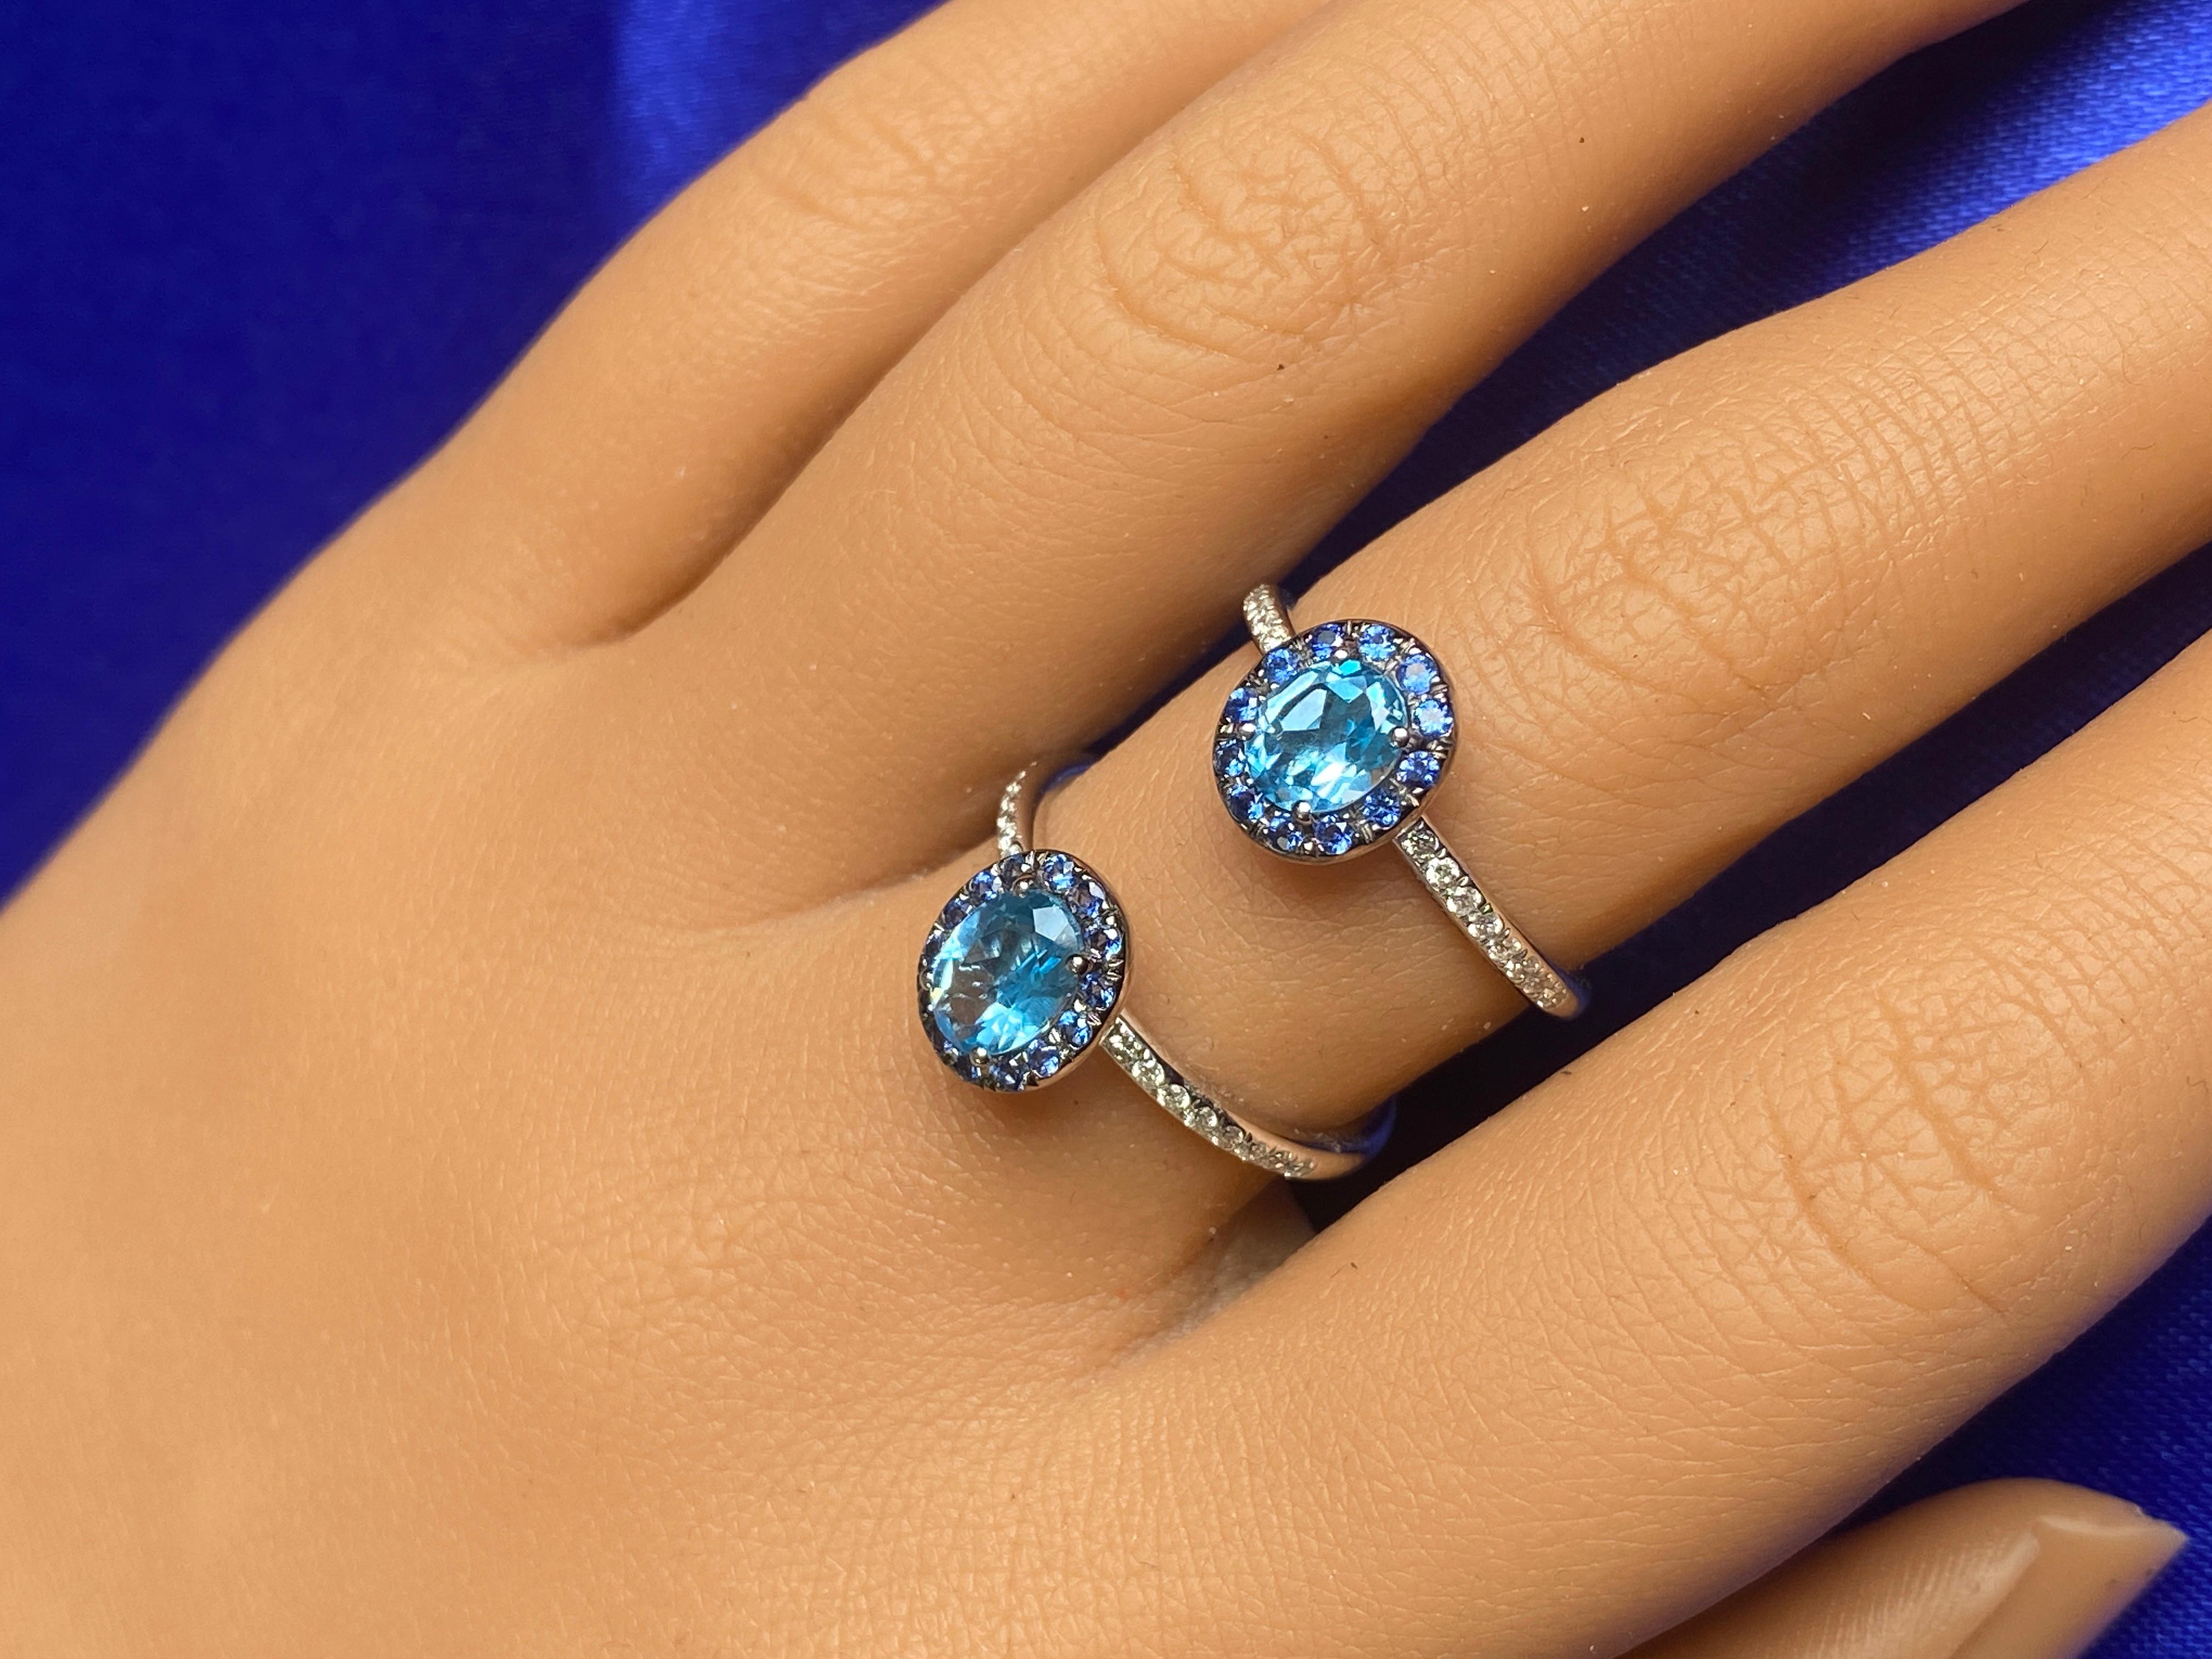 A ring with 3 stones in 1! Starting in the center, a Swiss Blue Topaz. The oval center stone is a variation of a blue topaz! The Swiss blue topaz is a topaz with a nice blue hue! The perfect combination of light and dark makes this topaz one of the